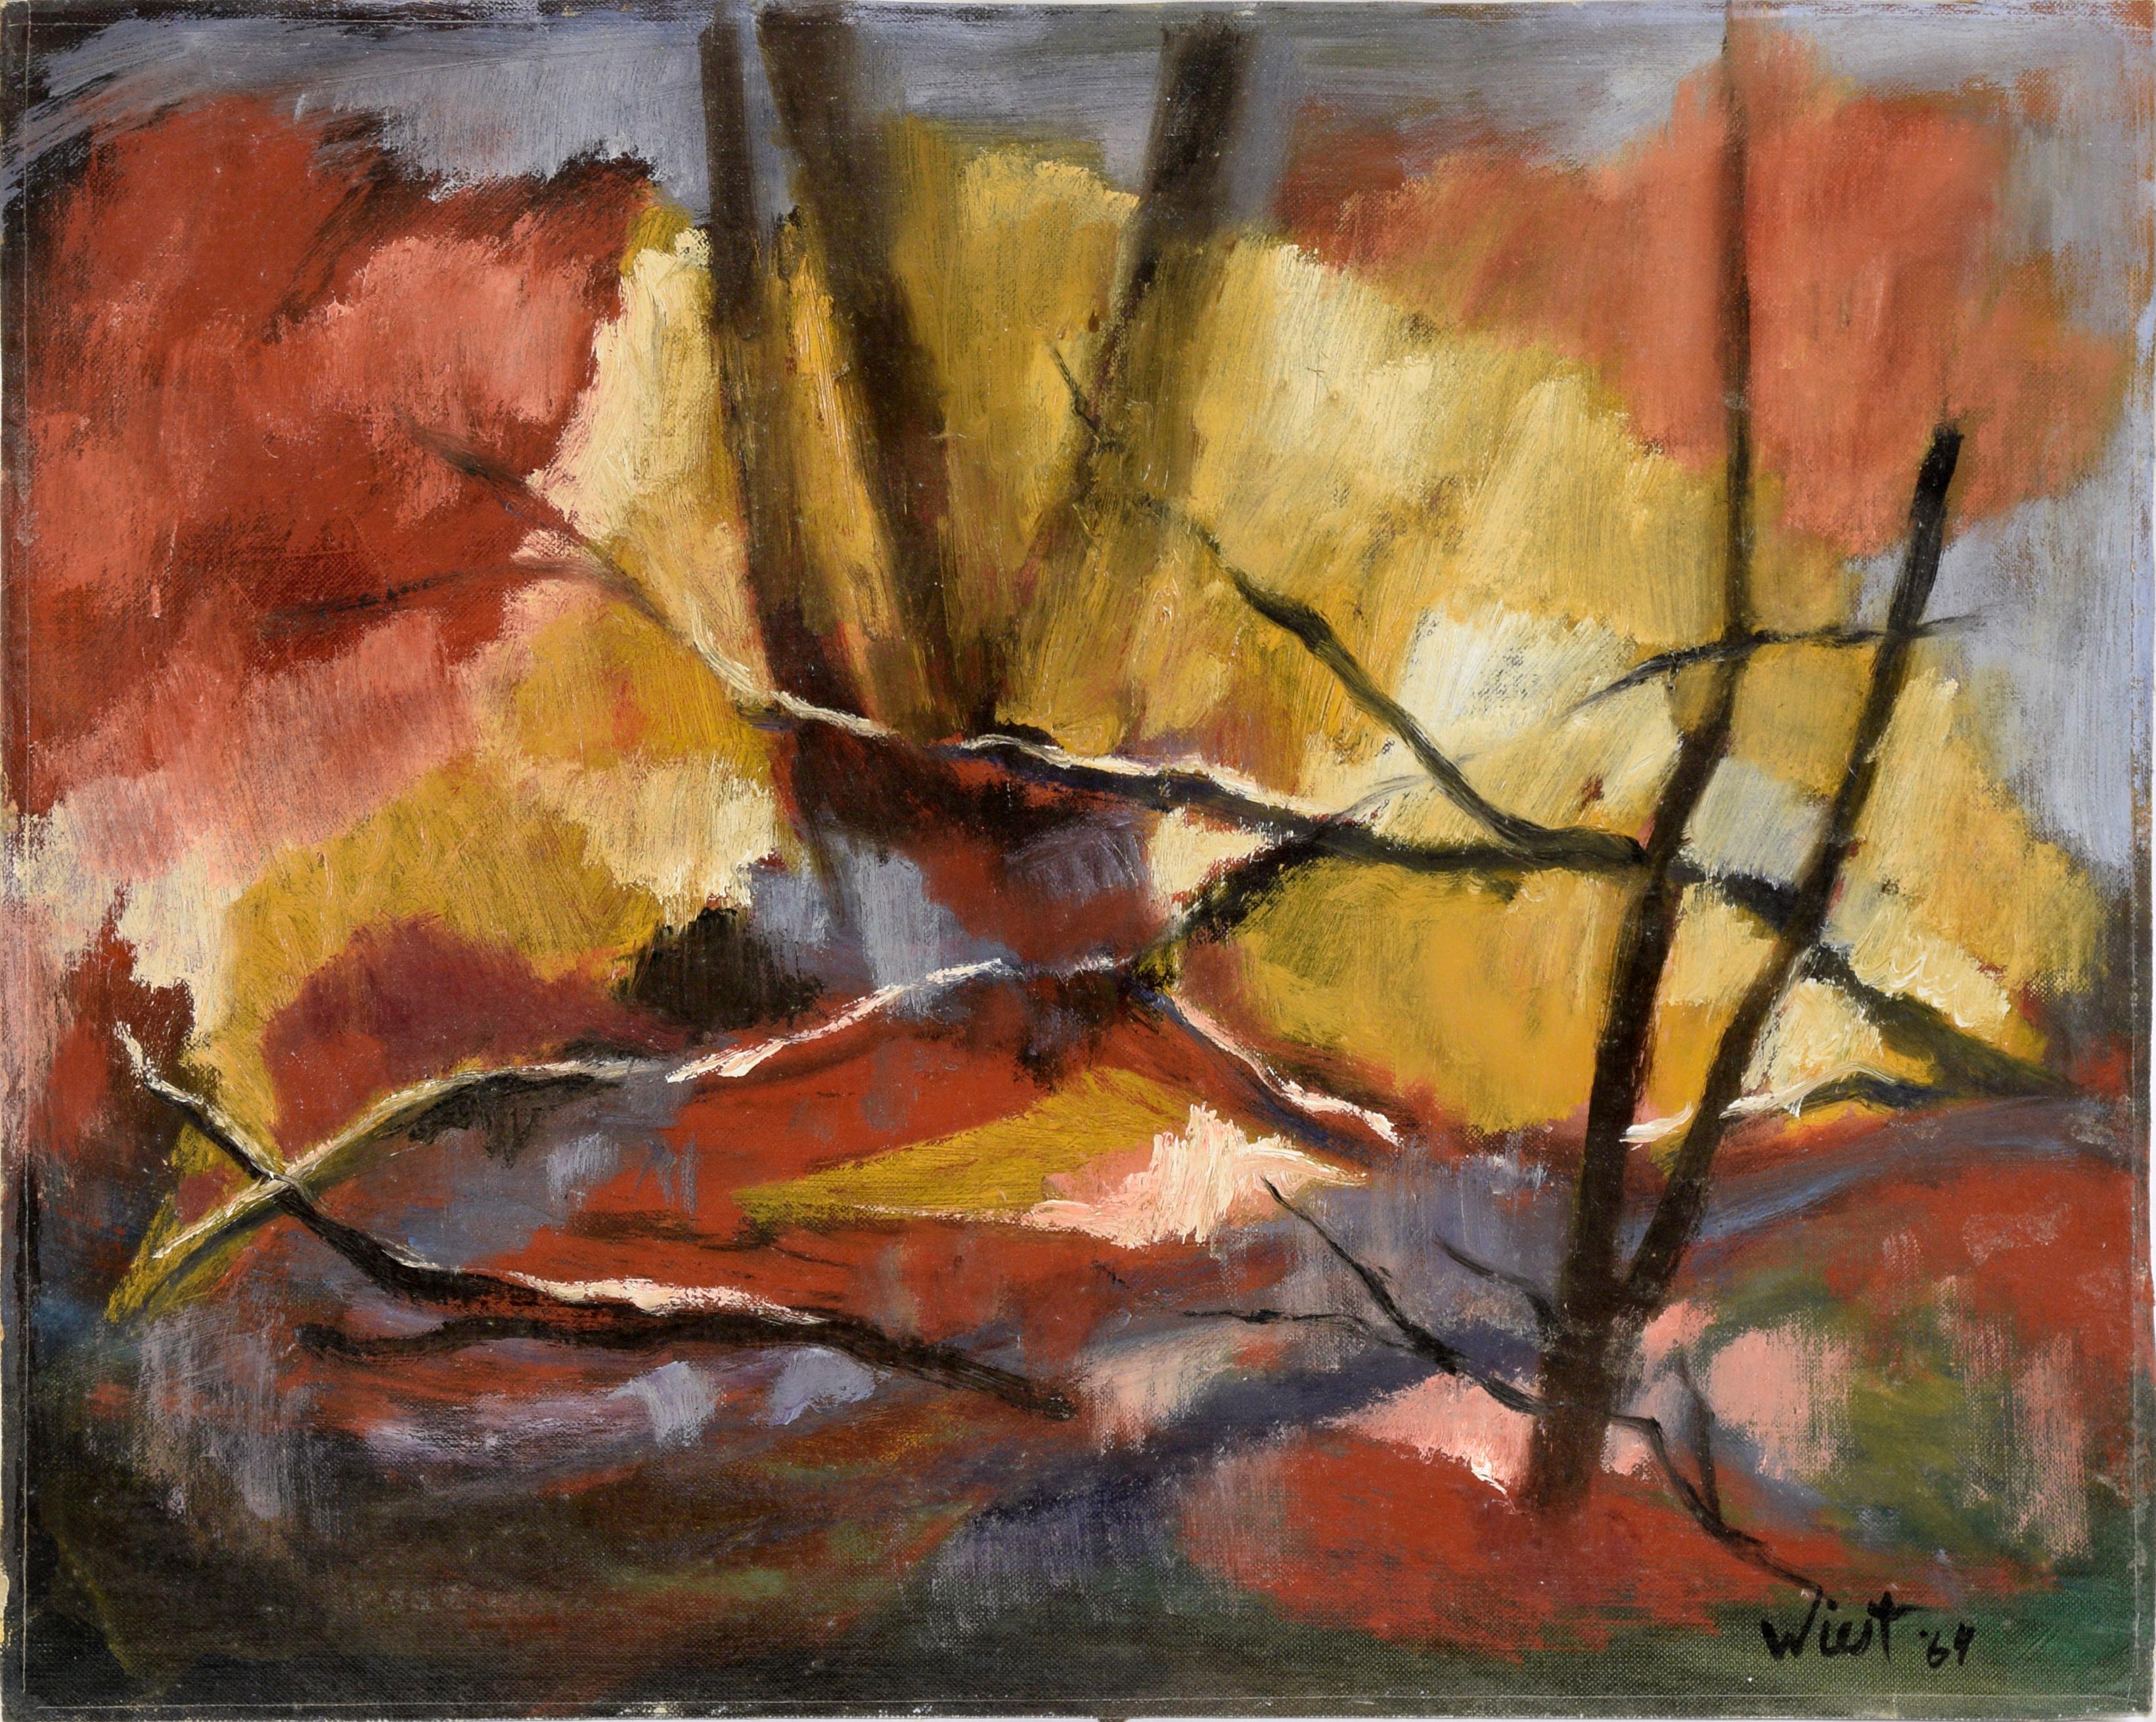 Claire Weist Landscape Painting - "Autumn Nocturne" - Abstracted Forest Landscape in Oil on Artist's Board